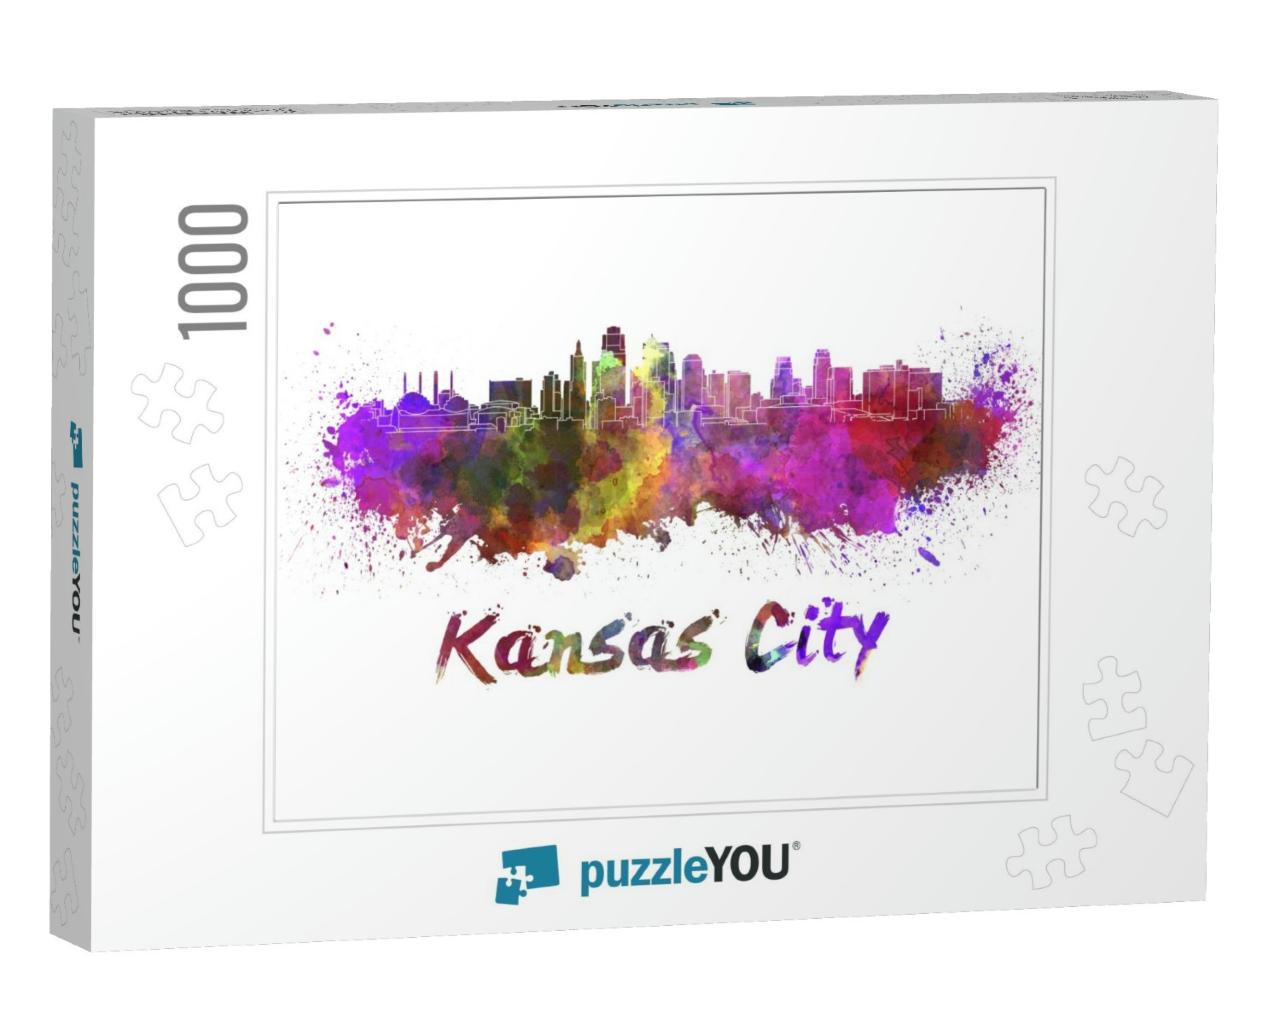 Kansas City Skyline in Watercolor Splatters with Clipping... Jigsaw Puzzle with 1000 pieces